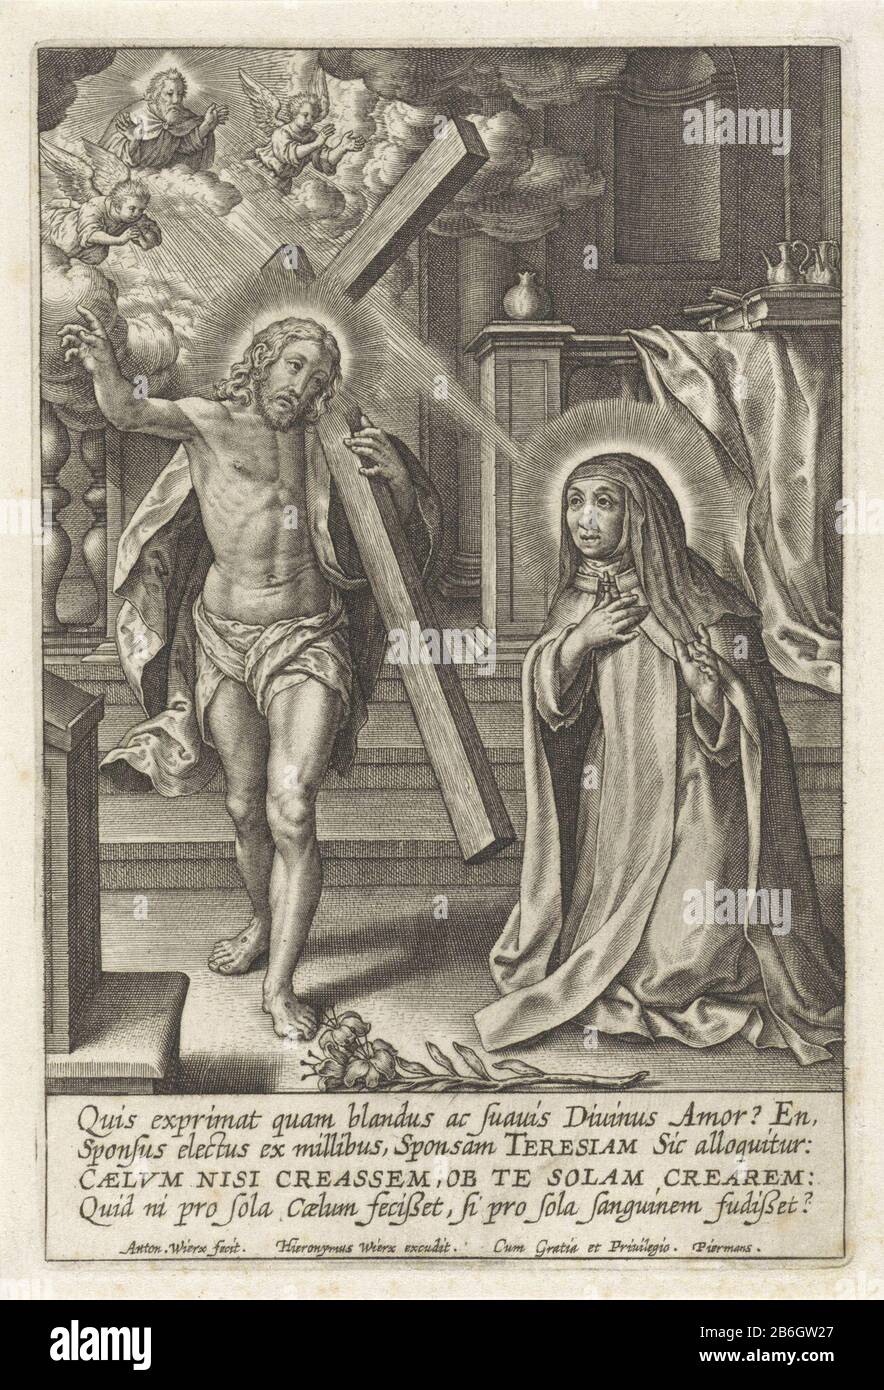 Christ appears to H Teresa of Avila The Avila Saint Teresa kneels in a church. At her feet is a lily. For her, Christ appeared, he carries his cross on his shoulder. In heaven, God the Father, flanked by angels. In the margin a four-line signature in Latijn. Manufacturer : printmaker Antonie Who: rix (III) (listed building) Publisher: Hieronymus Wierix (listed property) provider of privilege: Pieremans (listed property) Place manufacture: Antwerp Date: 1563 - for 1619 Physical characteristics: engra material: paper Technique: engra (printing process) Measurements: plate edge: h 137 mm × b 91 m Stock Photo